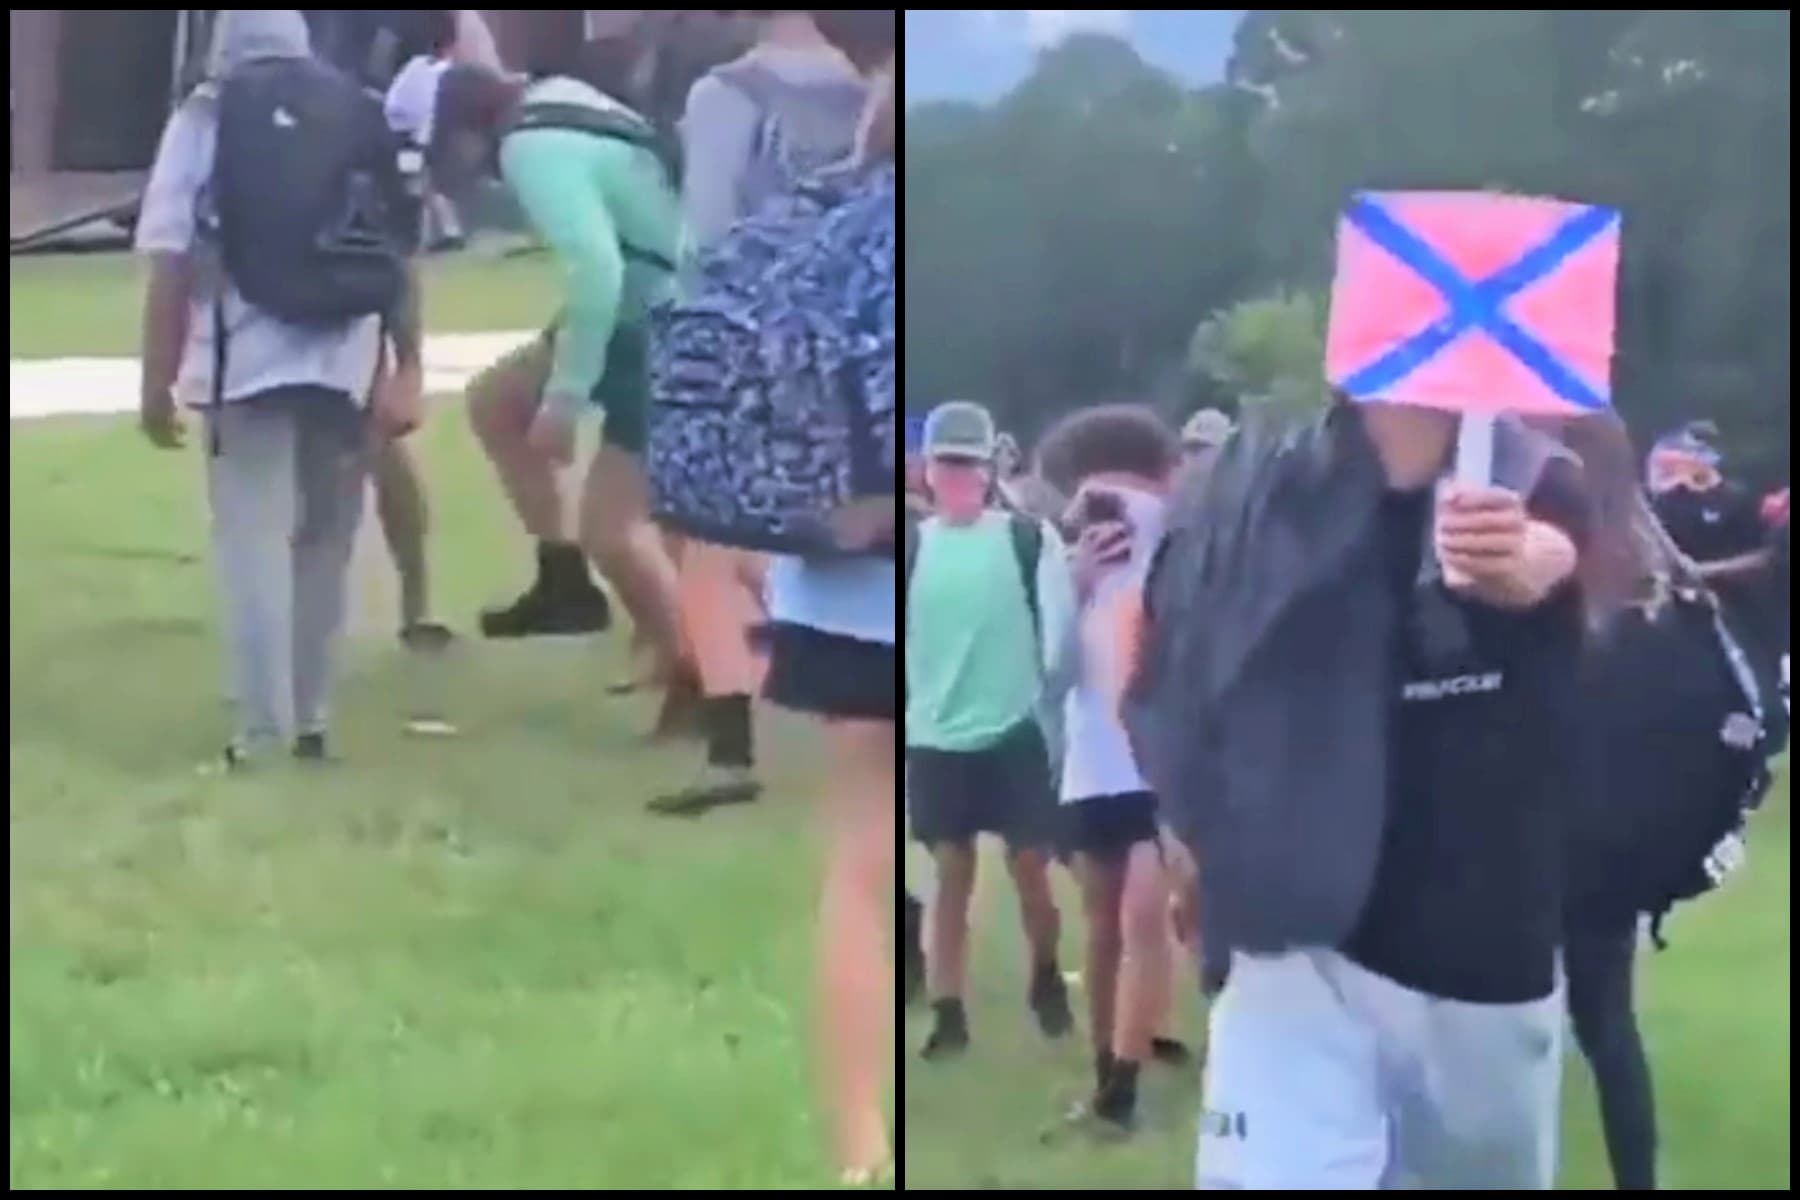 Florida school investigating after students yell anti-gay slurs, stomp on Pride flag